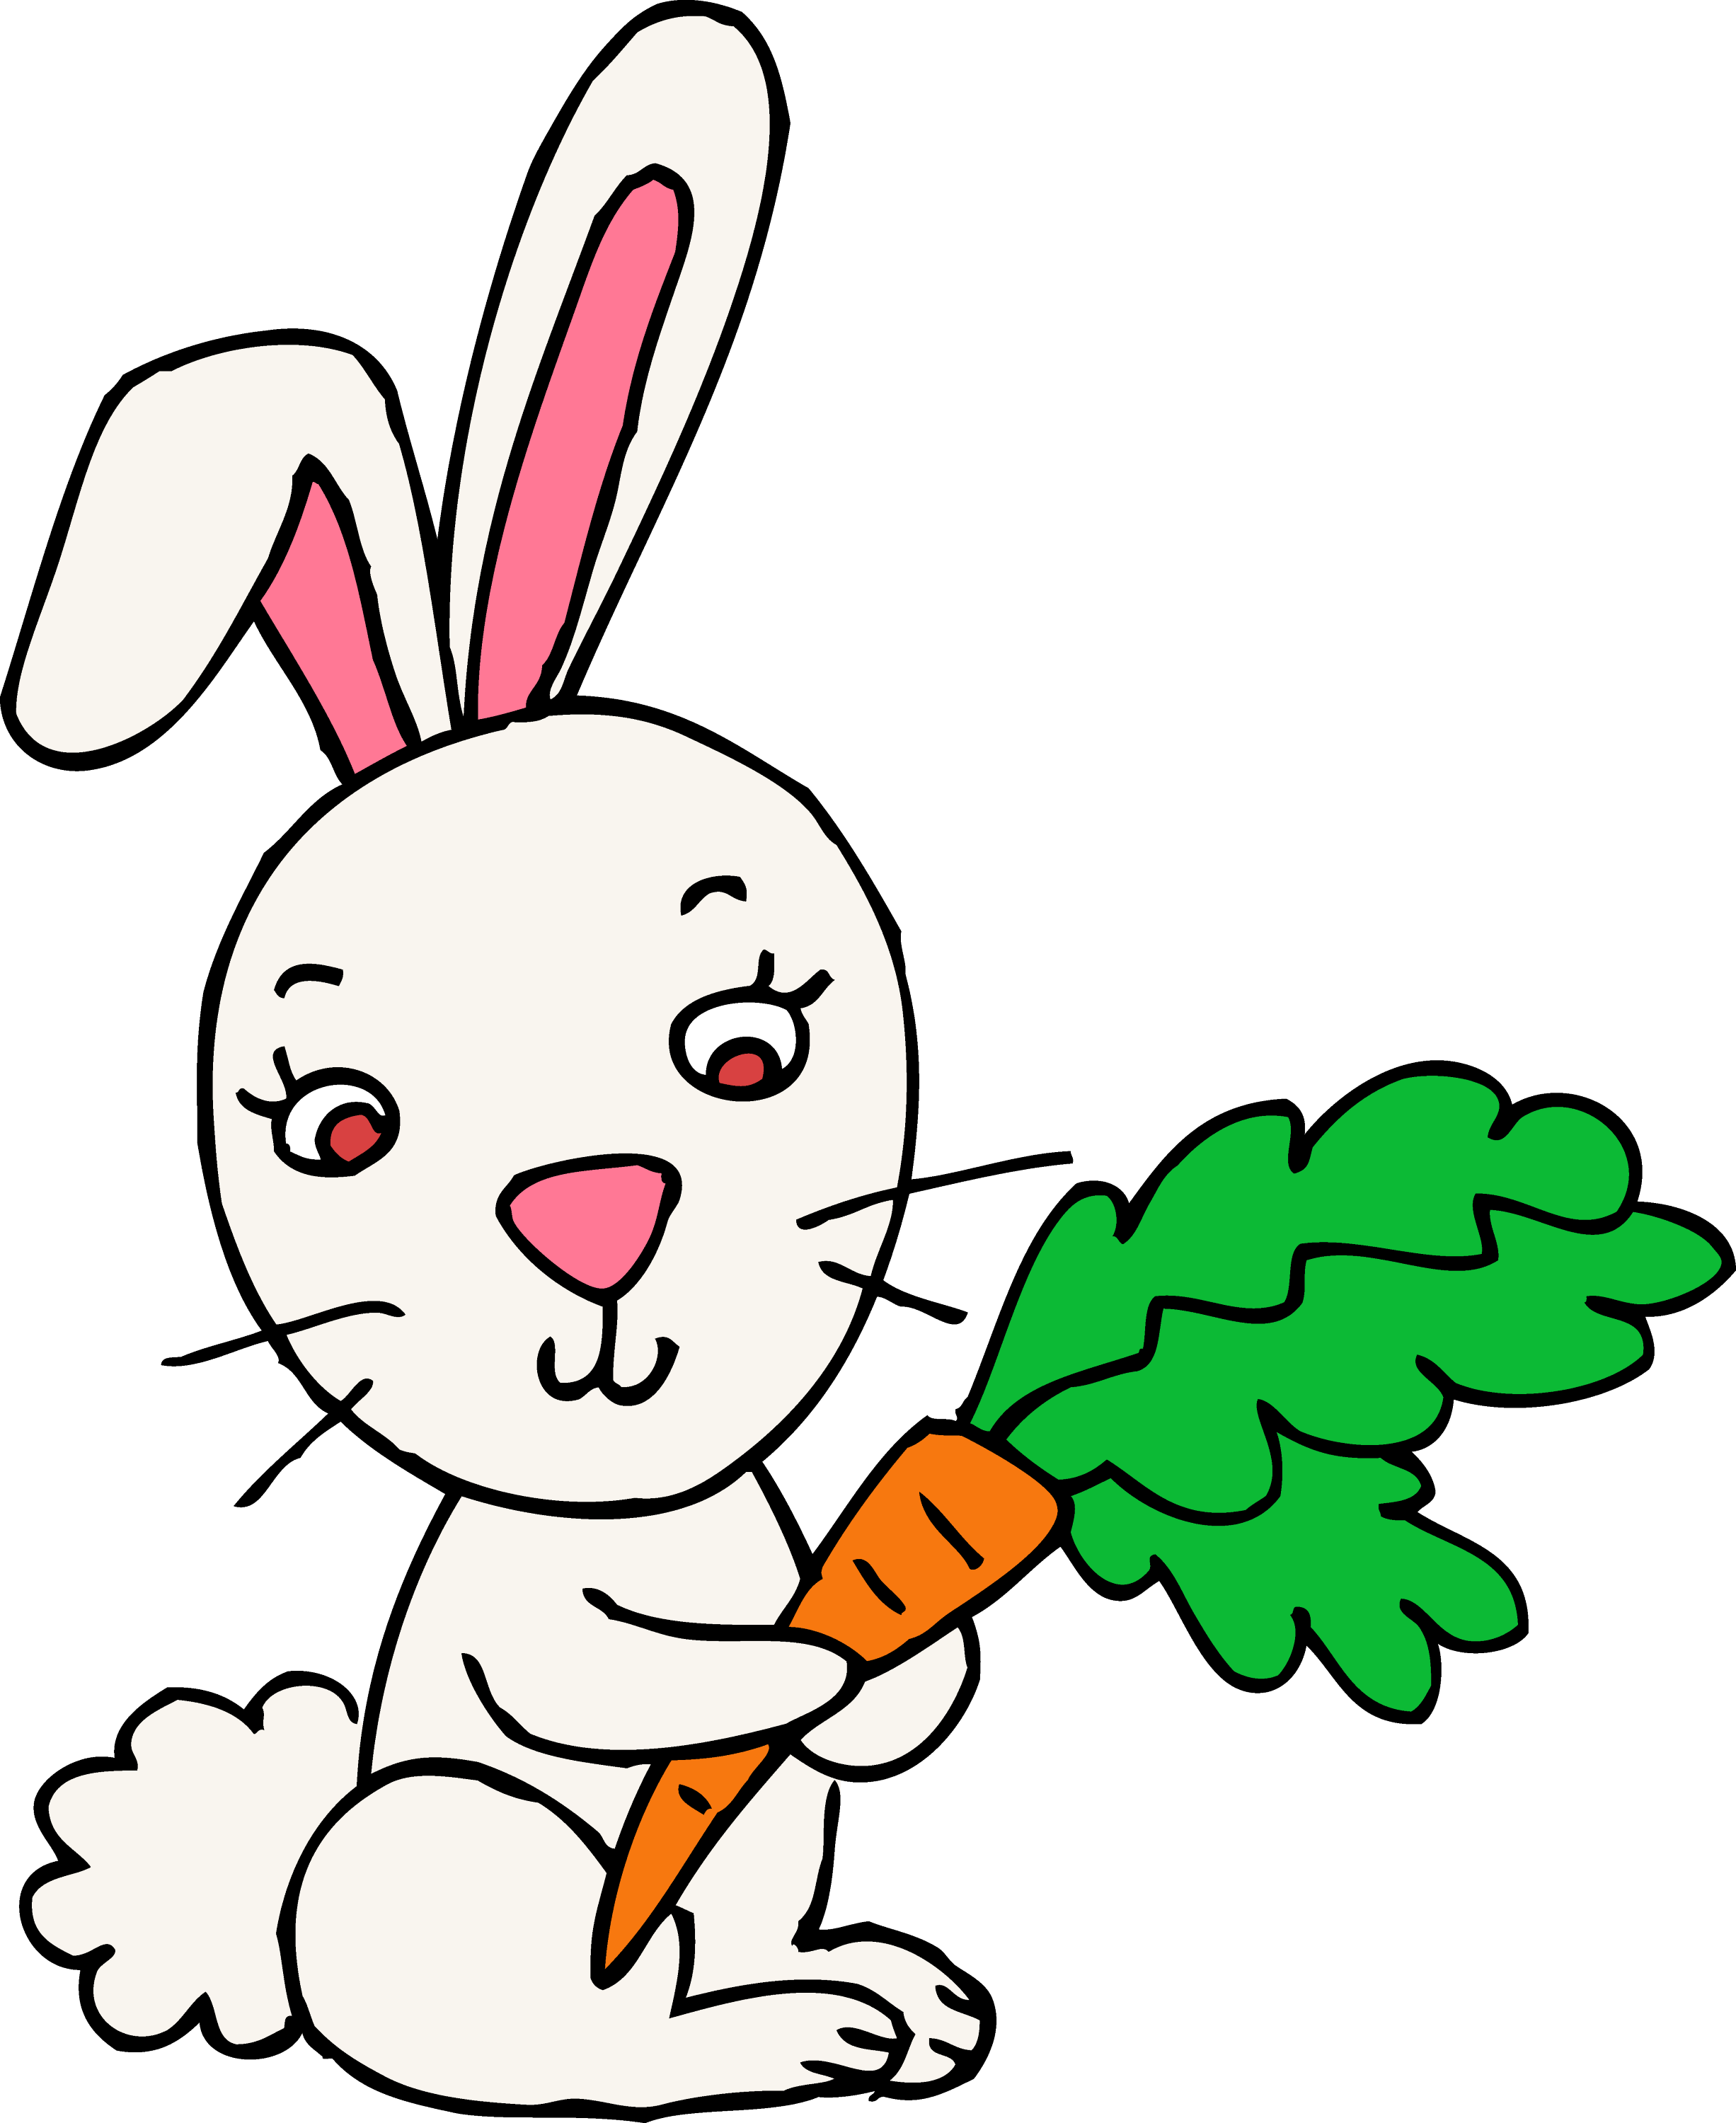 free clipart images easter bunny - photo #22